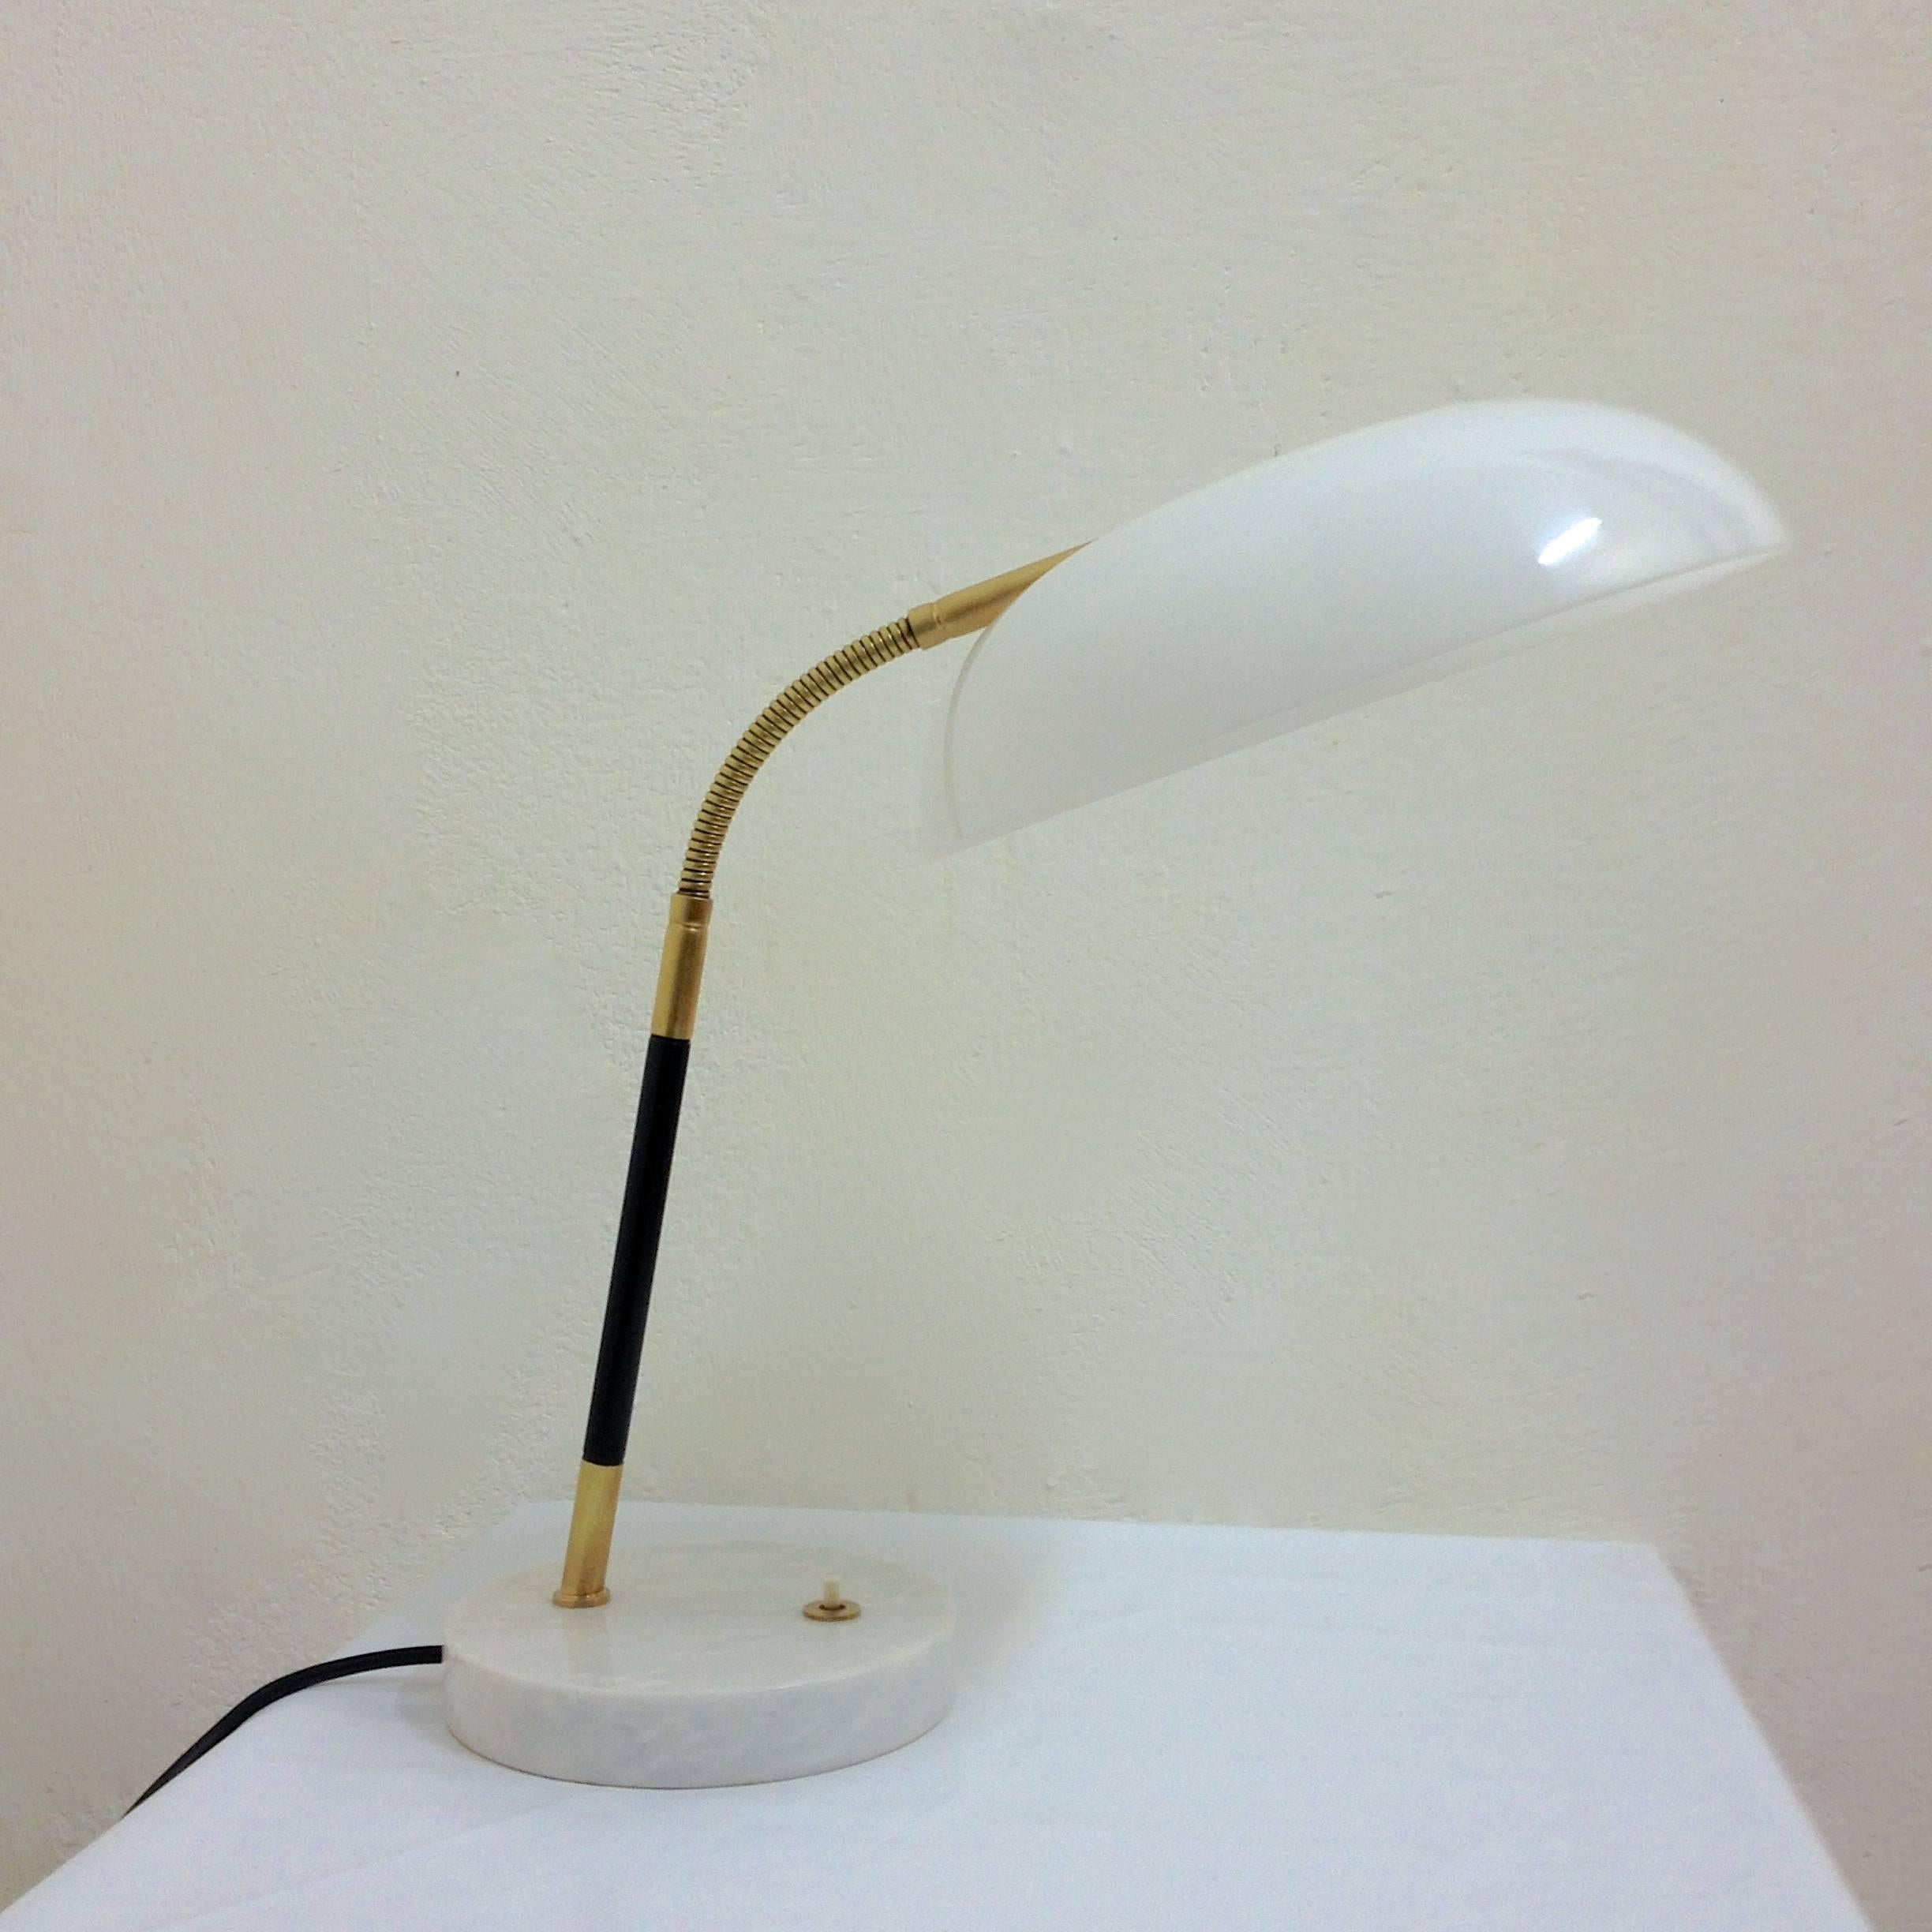 Italian desk lamp with white Carrara marble base, brass arm and details with height adjustable rounded shade.